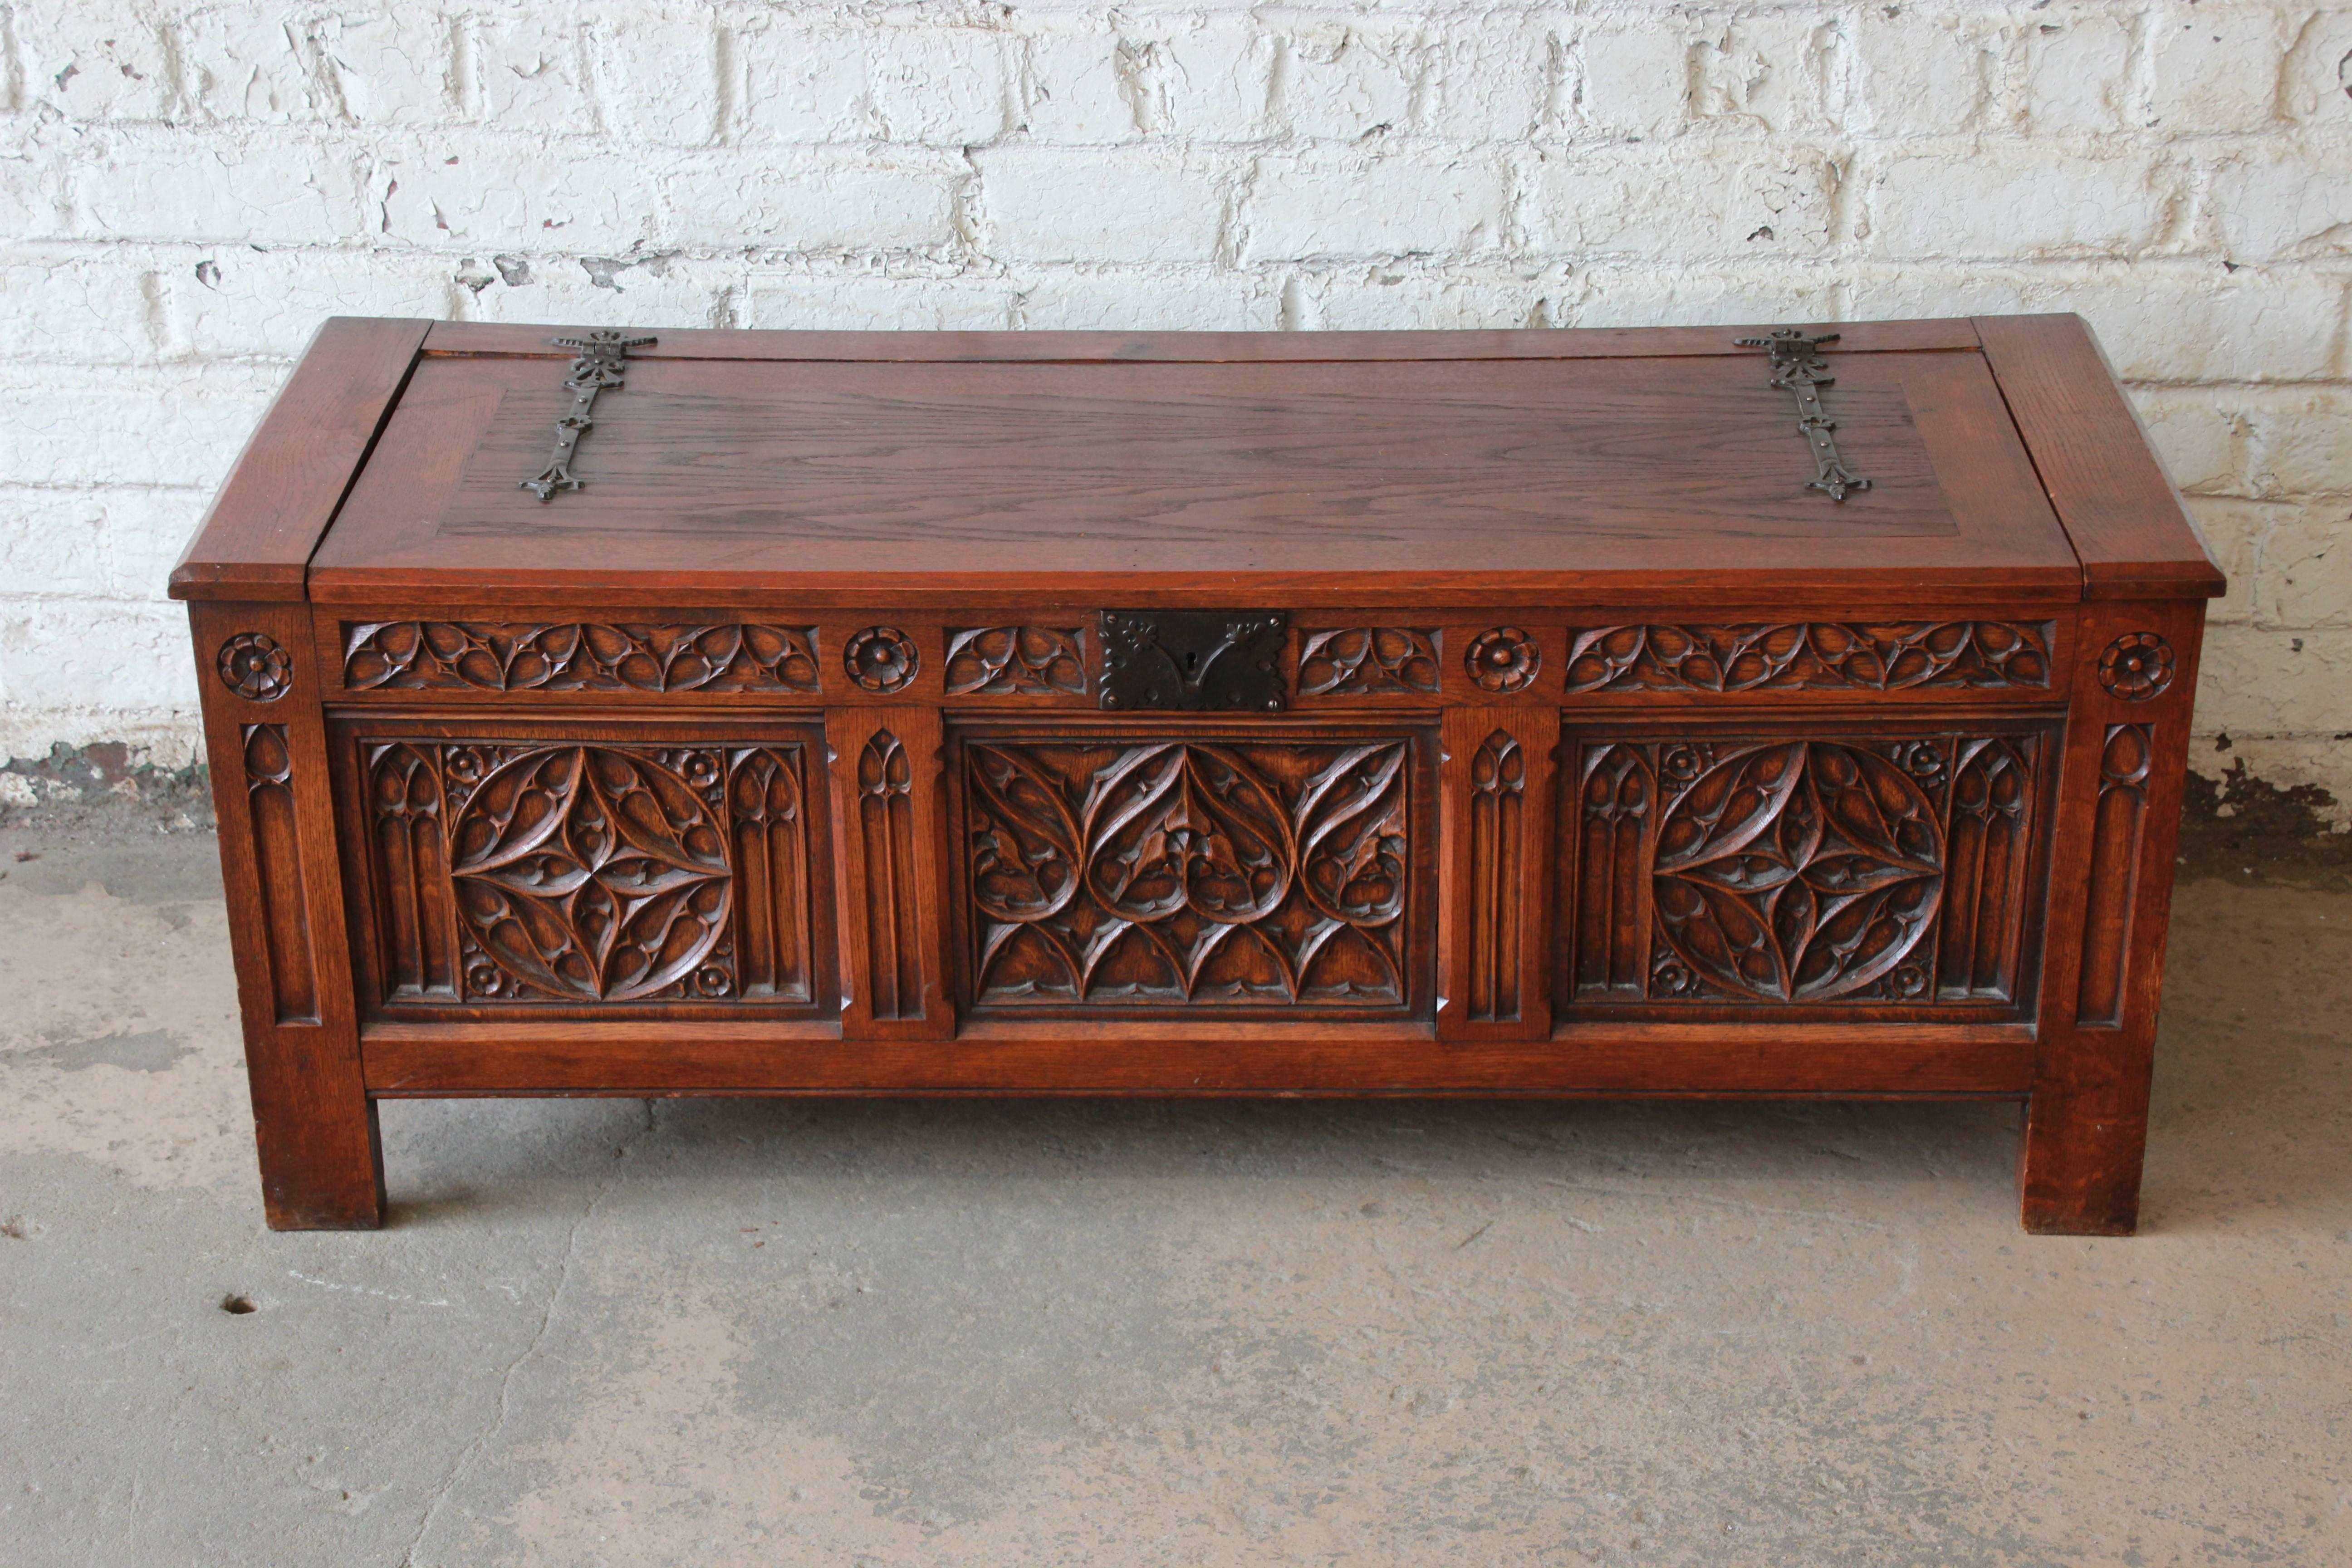 An exceptional Belgian Gothic Revival carved oak blanket chest or coffer. The chest features beautiful Gothic carved wood details and solid oak construction. The top flips up on iron hinges to reveal an open chest inside. Marked 